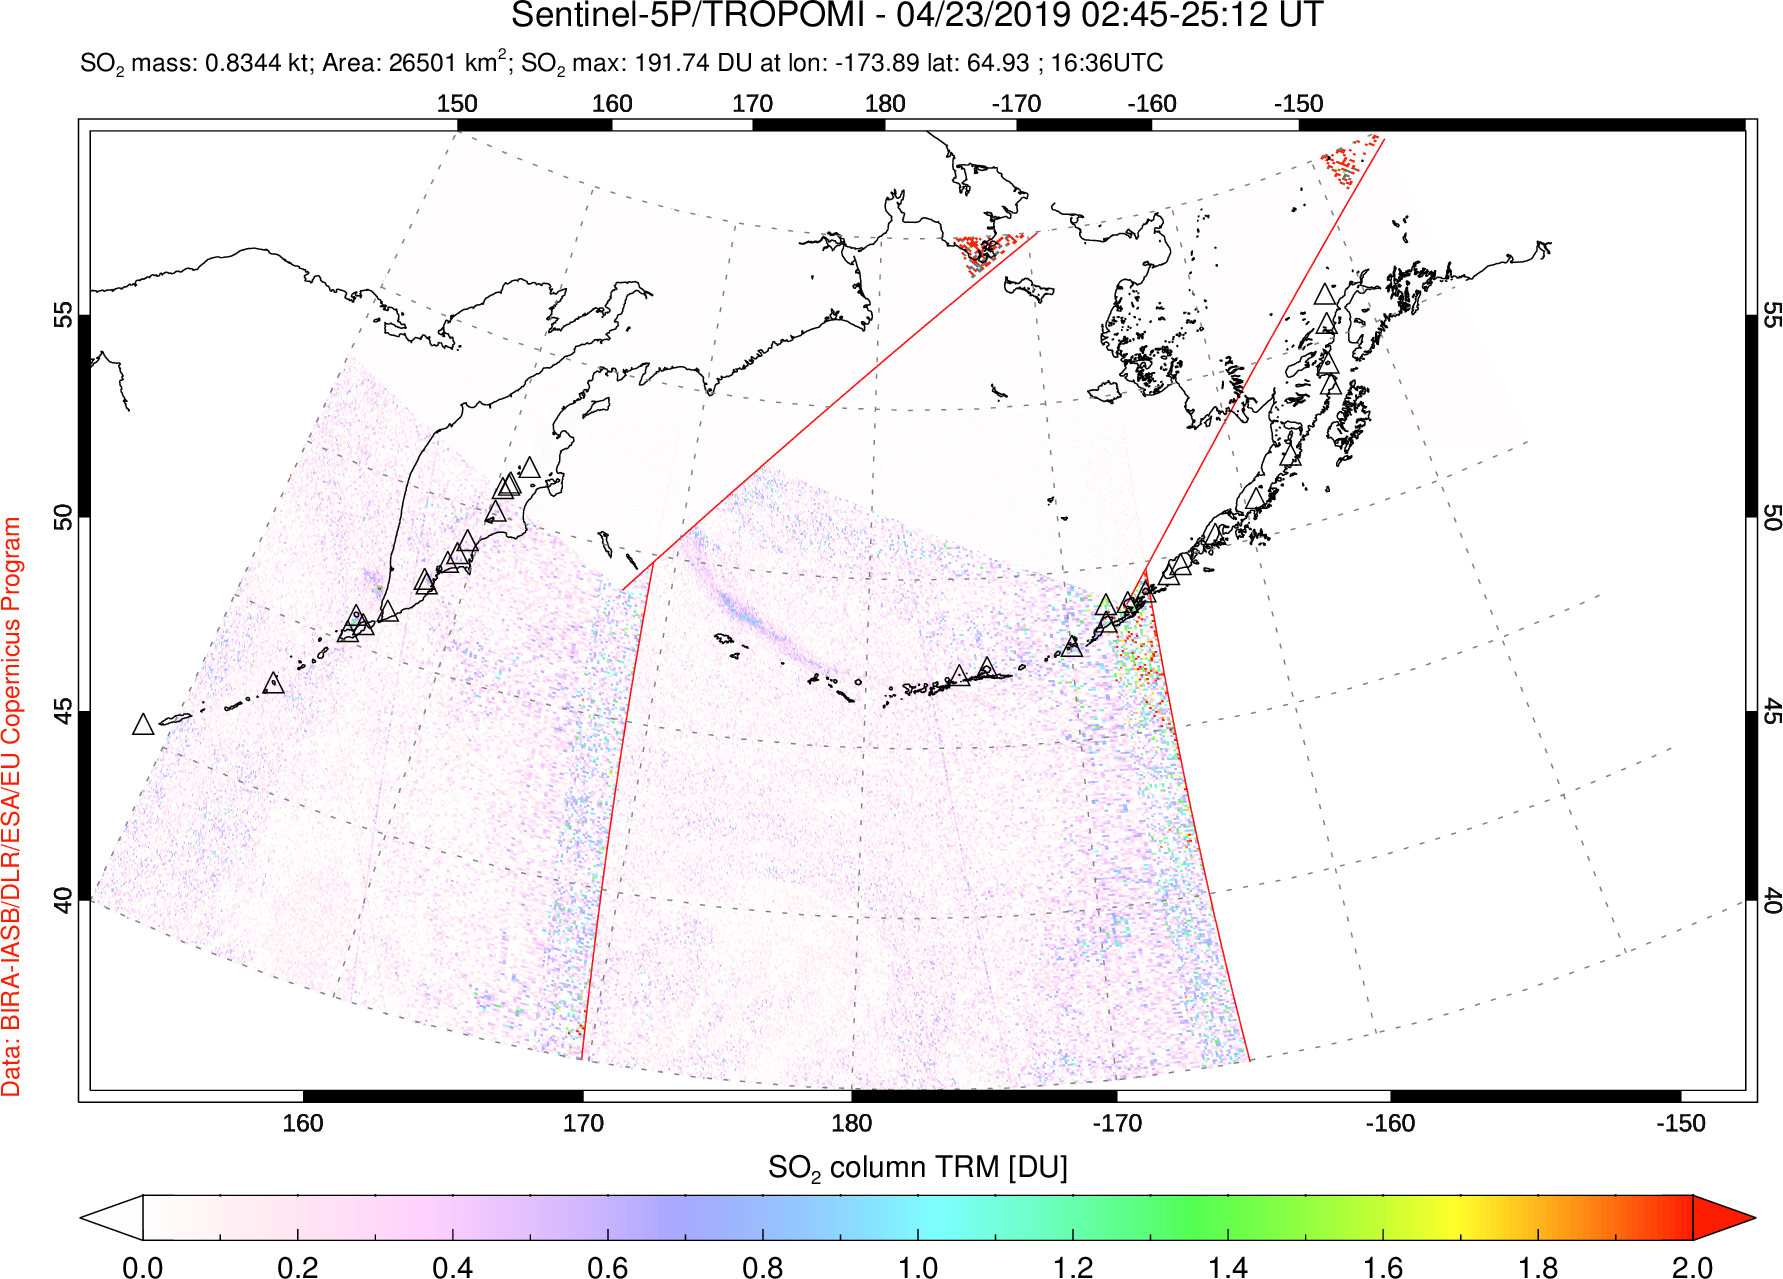 A sulfur dioxide image over North Pacific on Apr 23, 2019.